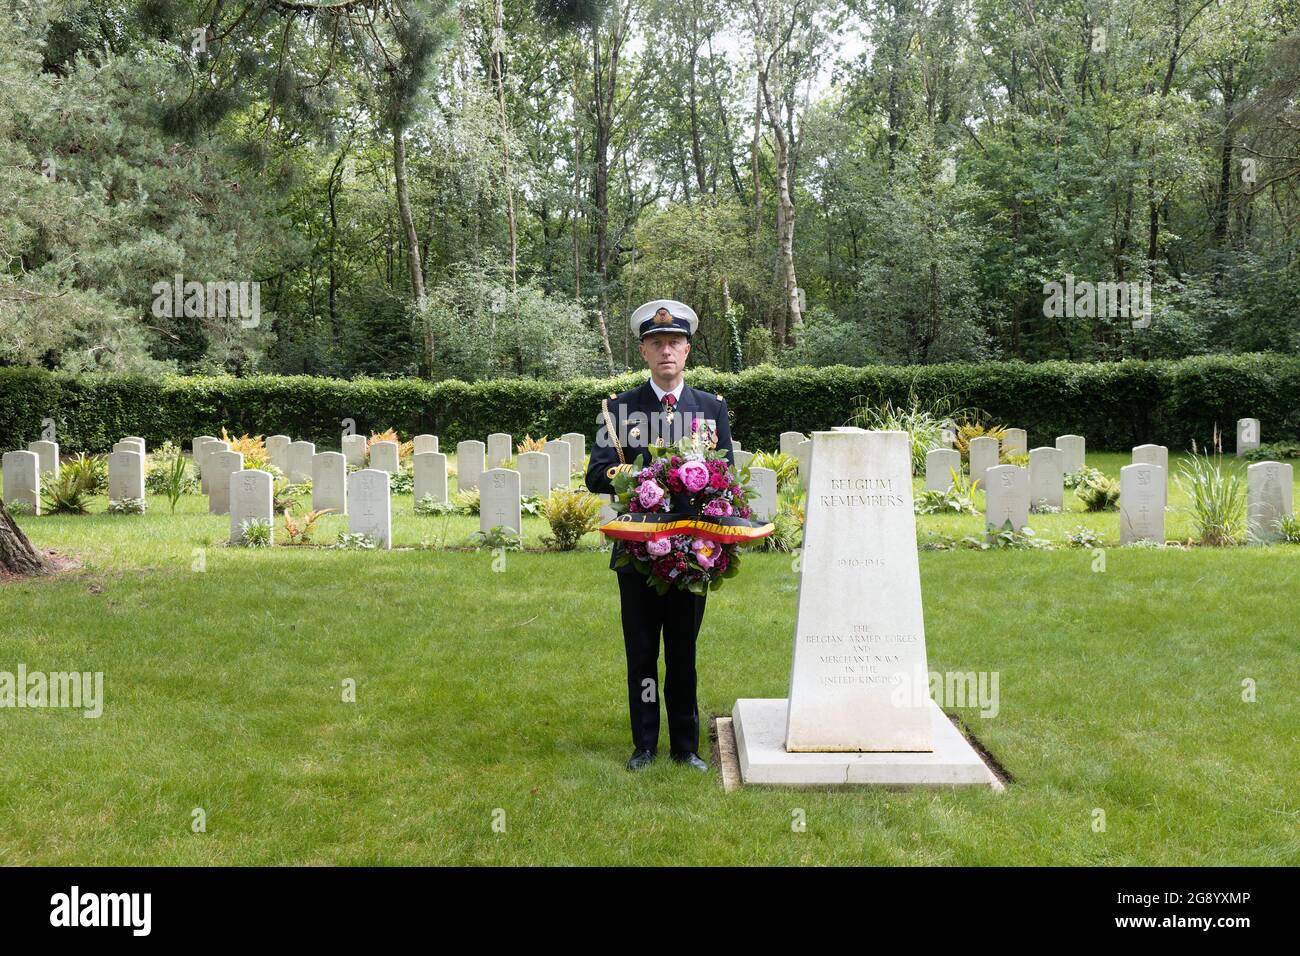 Captain Flamant Defence Attache of the London Embassy of the Kingdom of Belgium at the Belgian Memorial at Brookwood Military Cemetery where he is about to place a wreath on behalf of the Belgian Ambassador. Belgian headstones in the background. Stock Photo